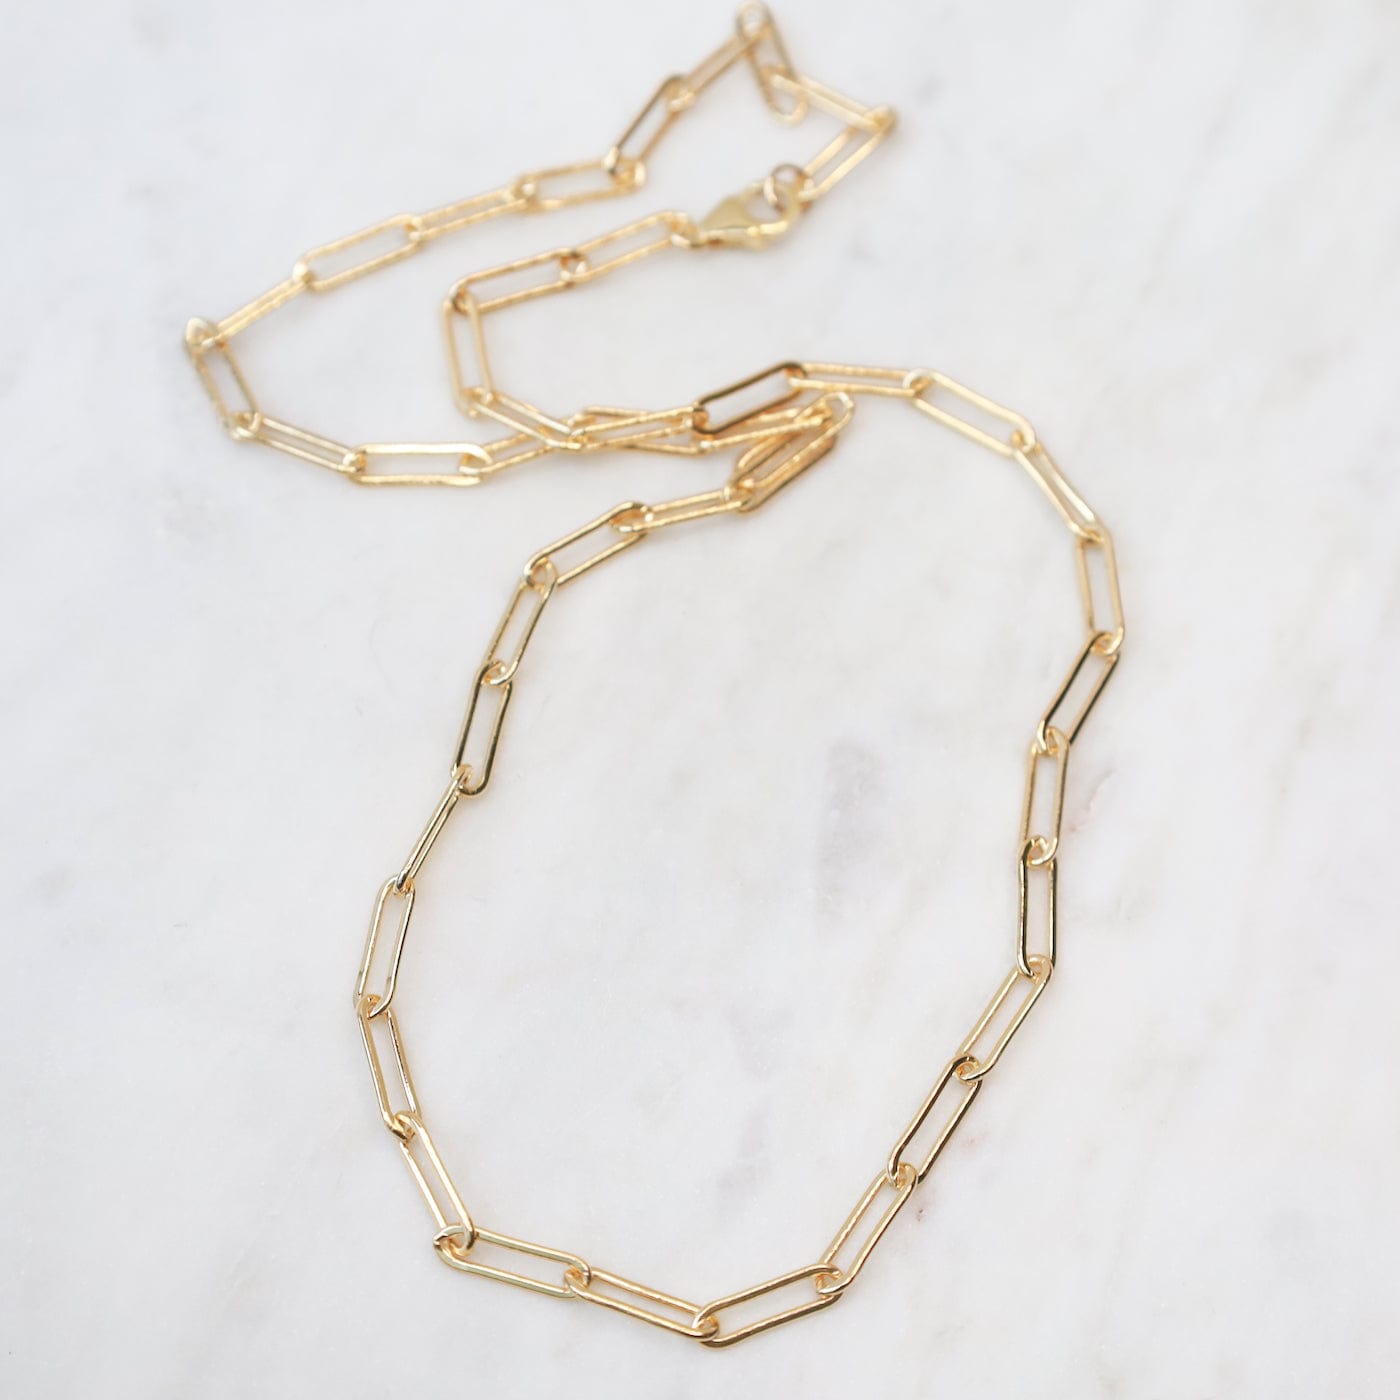 NKL-GF 20"  Gold Filled Flat Drawn Cable Chain Necklace